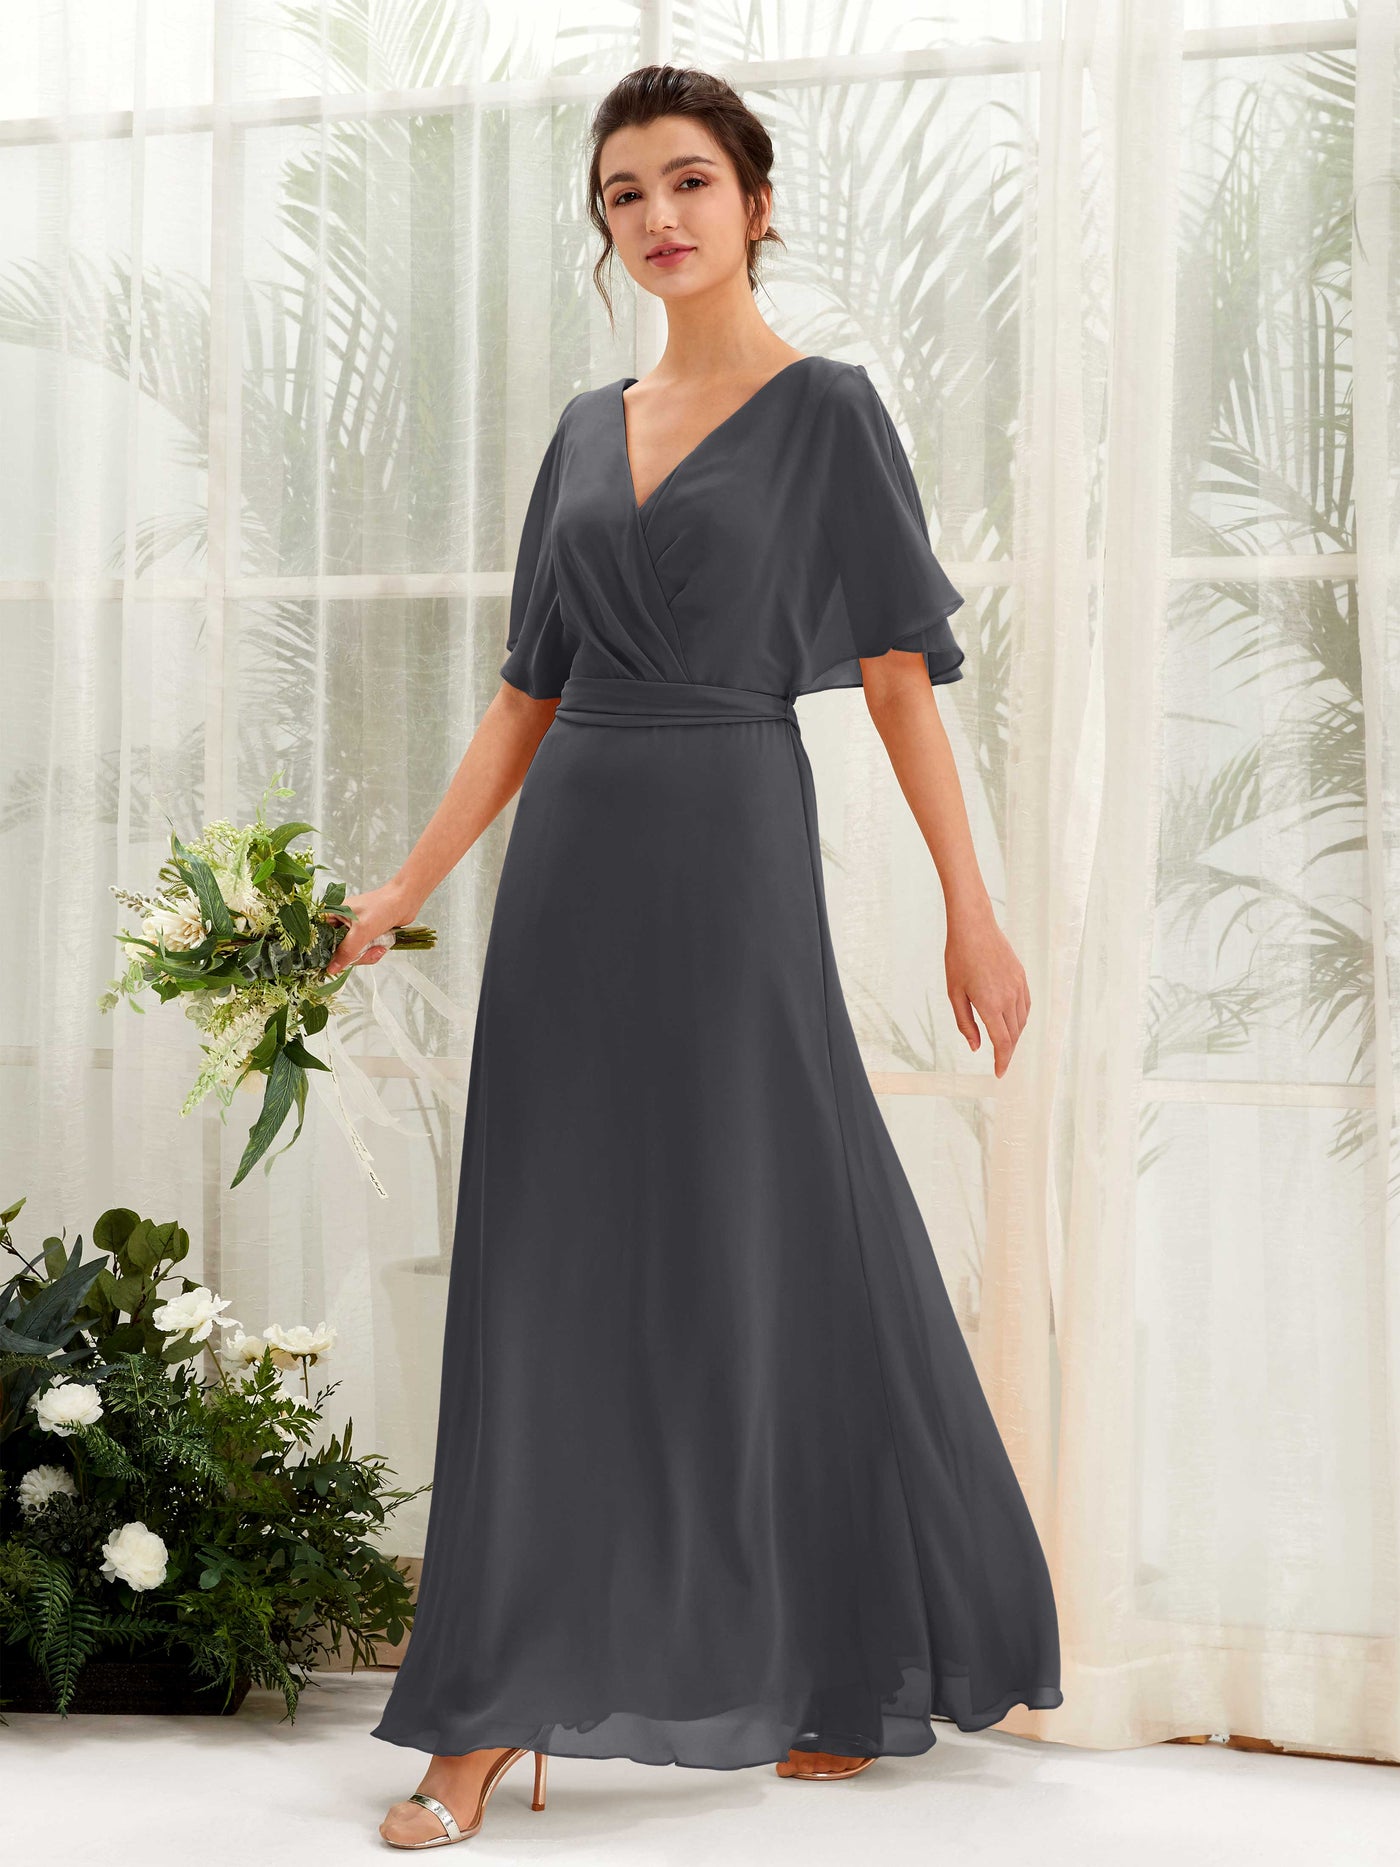 Pewter Bridesmaid Dresses Bridesmaid Dress A-line Chiffon V-neck Full Length Short Sleeves Wedding Party Dress (81222438)#color_pewter